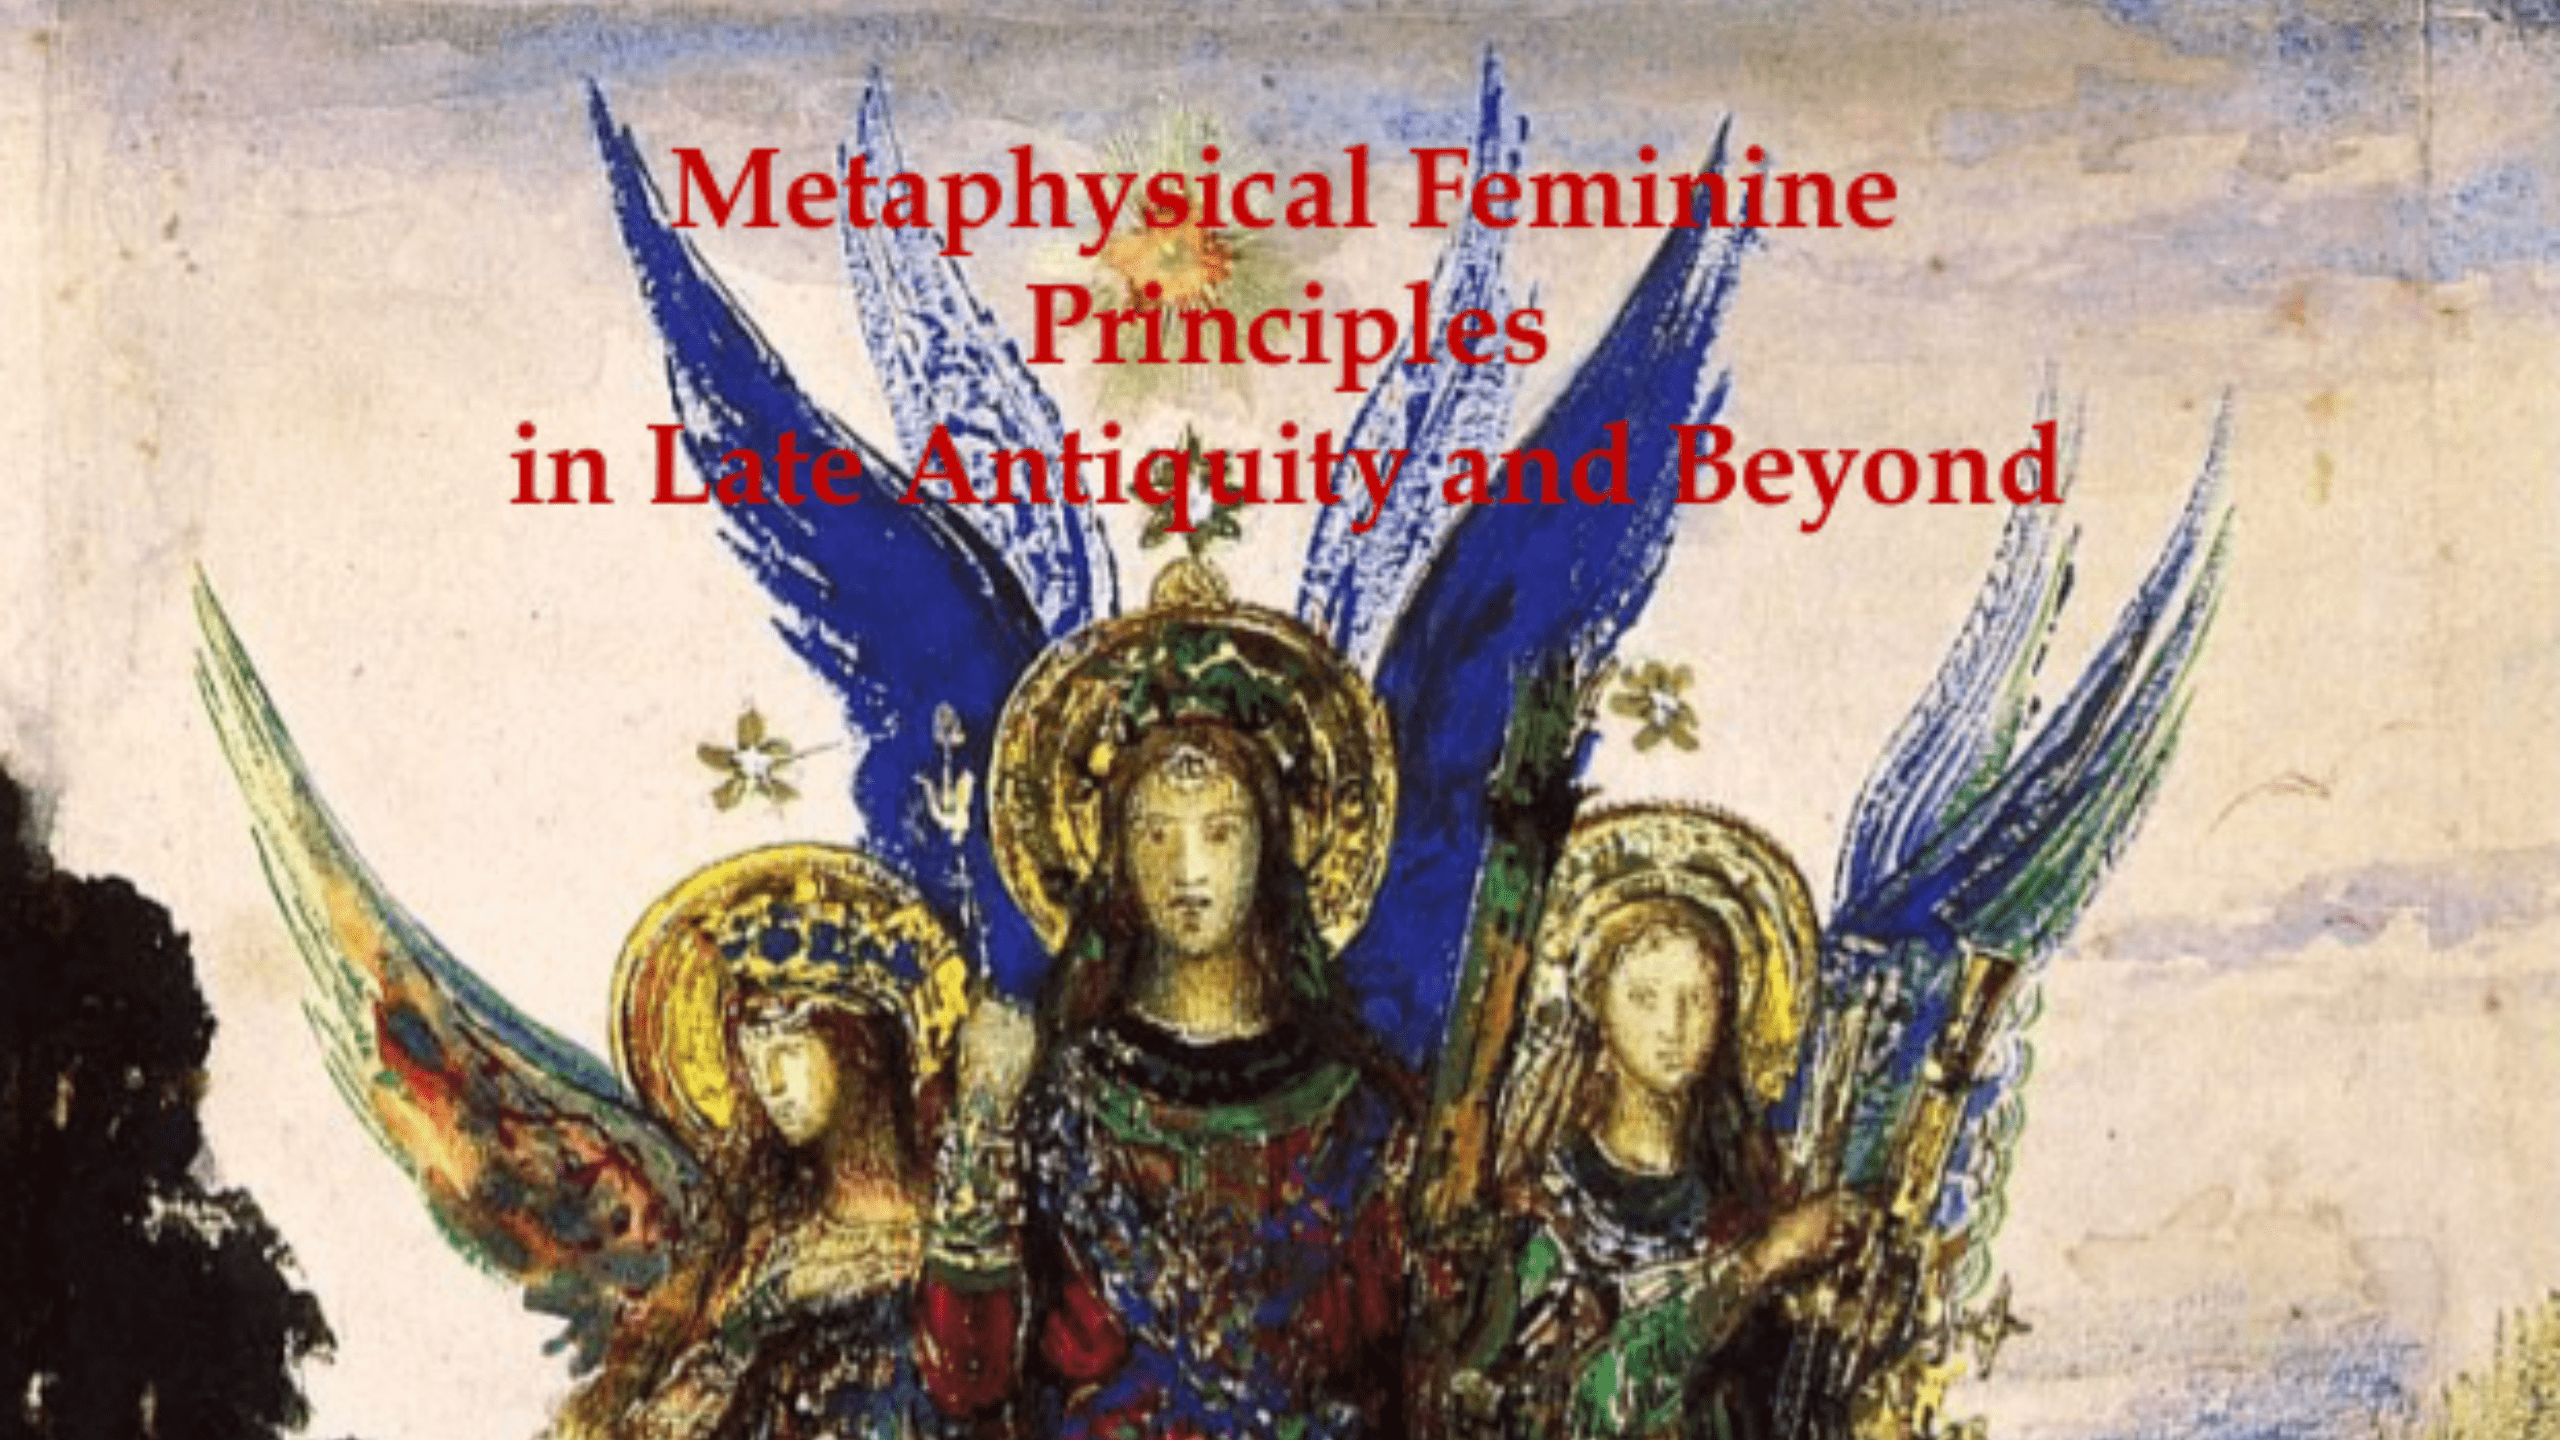 Conference | Metaphysical Feminine Principles in Late Antiquity and Beyond | 28th October 2023